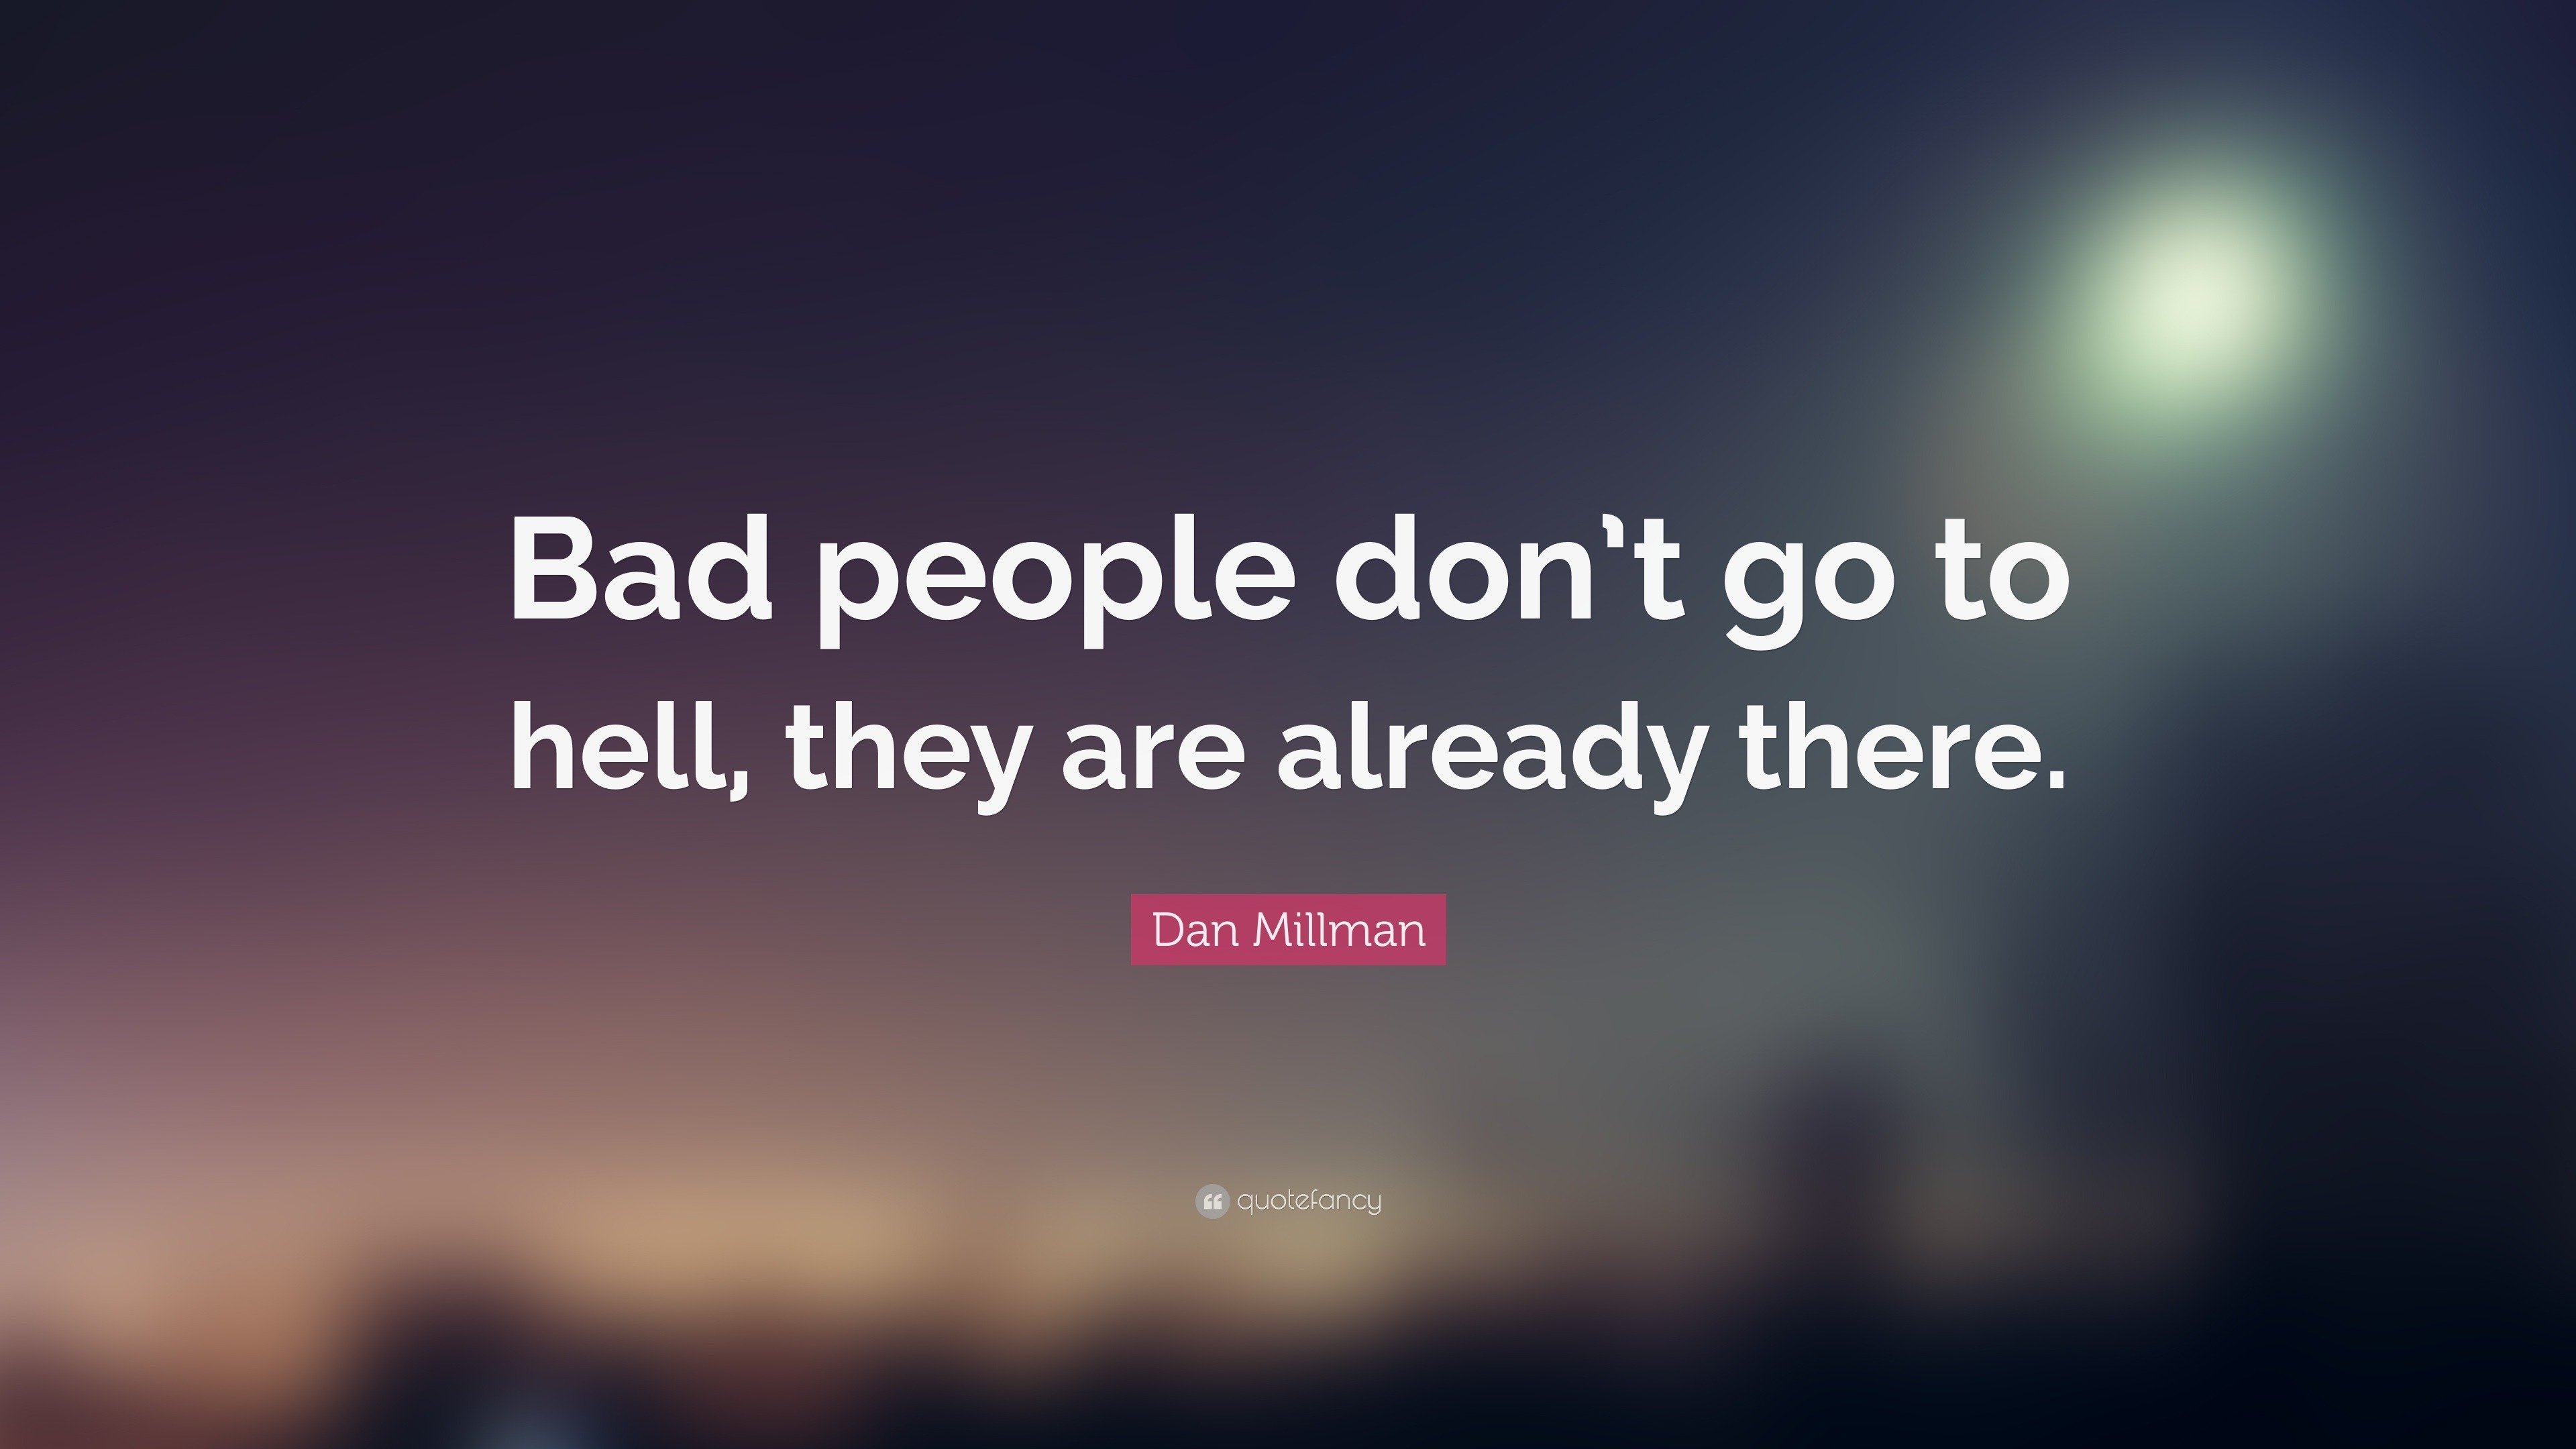 Dan Millman Quote: “Bad people don't go to hell, they are already there.”